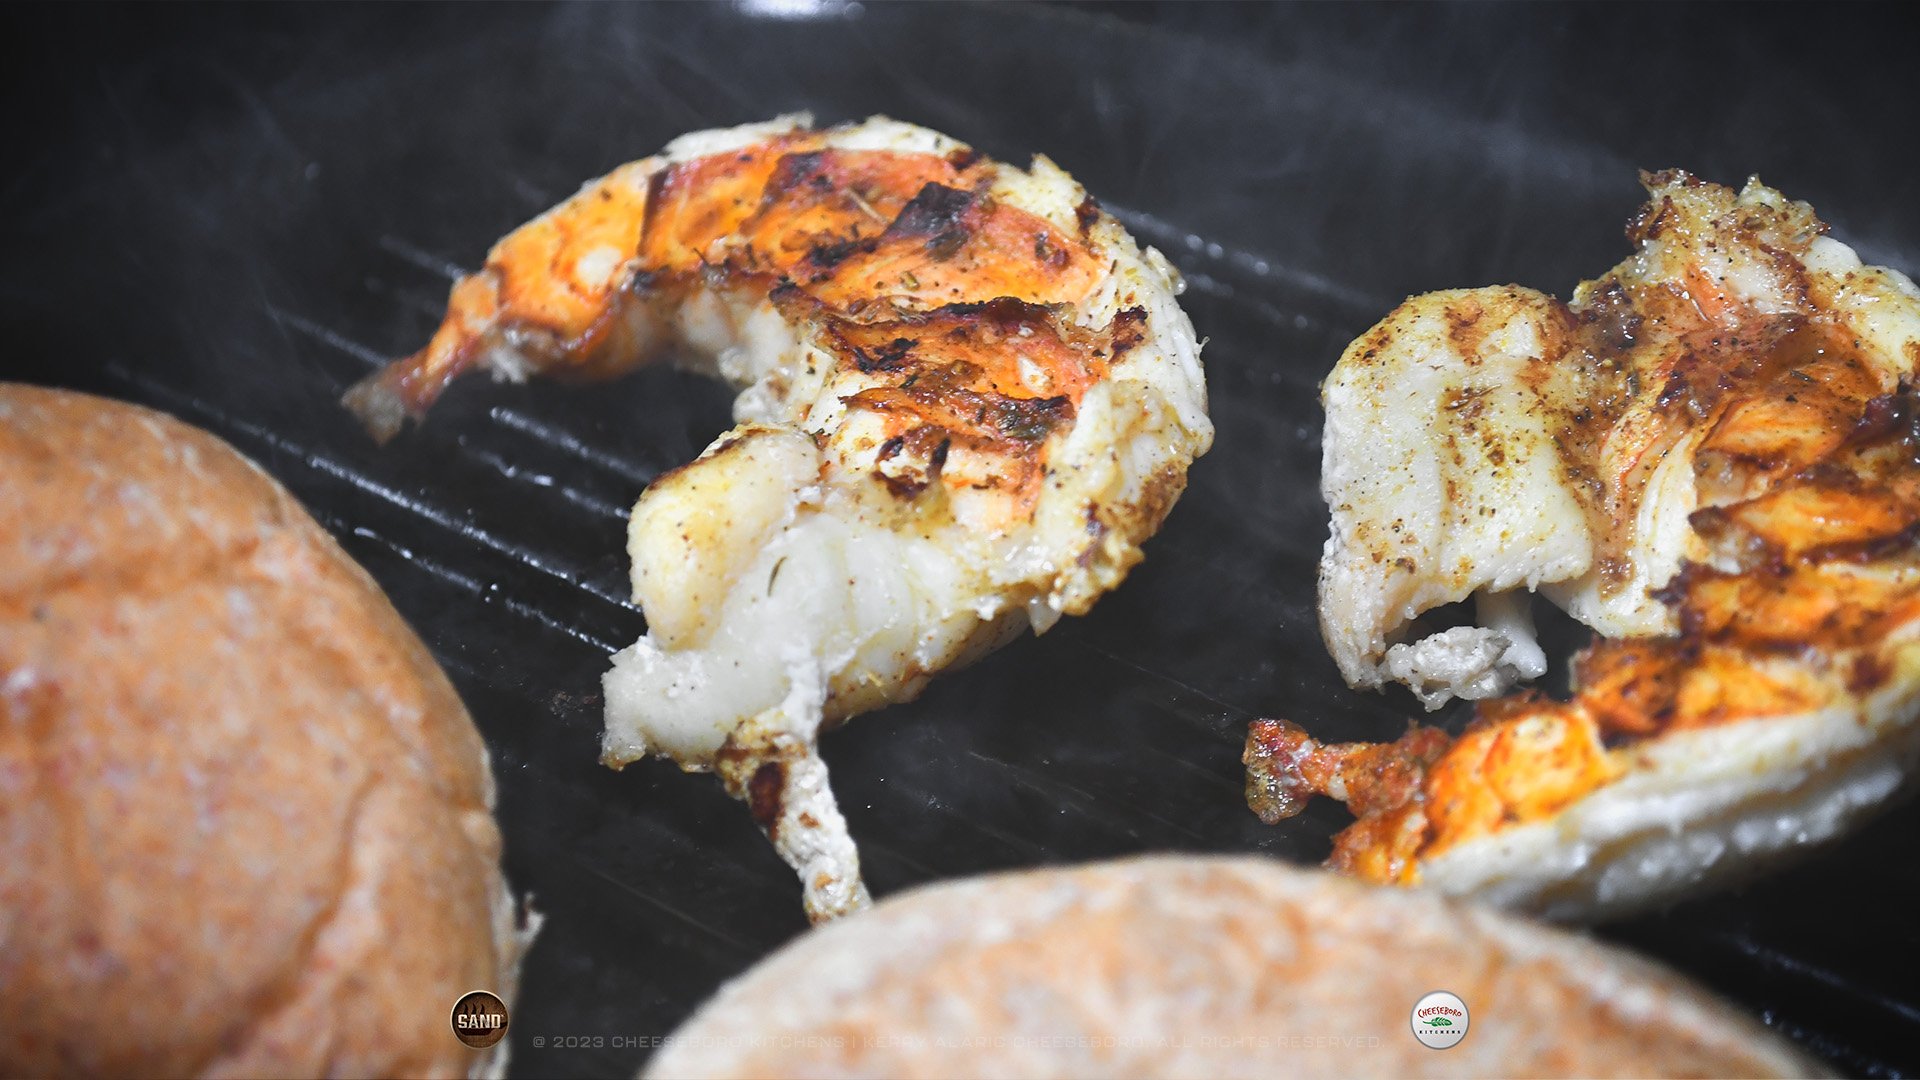 cheeskitch-231012-sands-combo-lobester-cutter-lobster-in-grill-pan-1-1920-hor.jpg